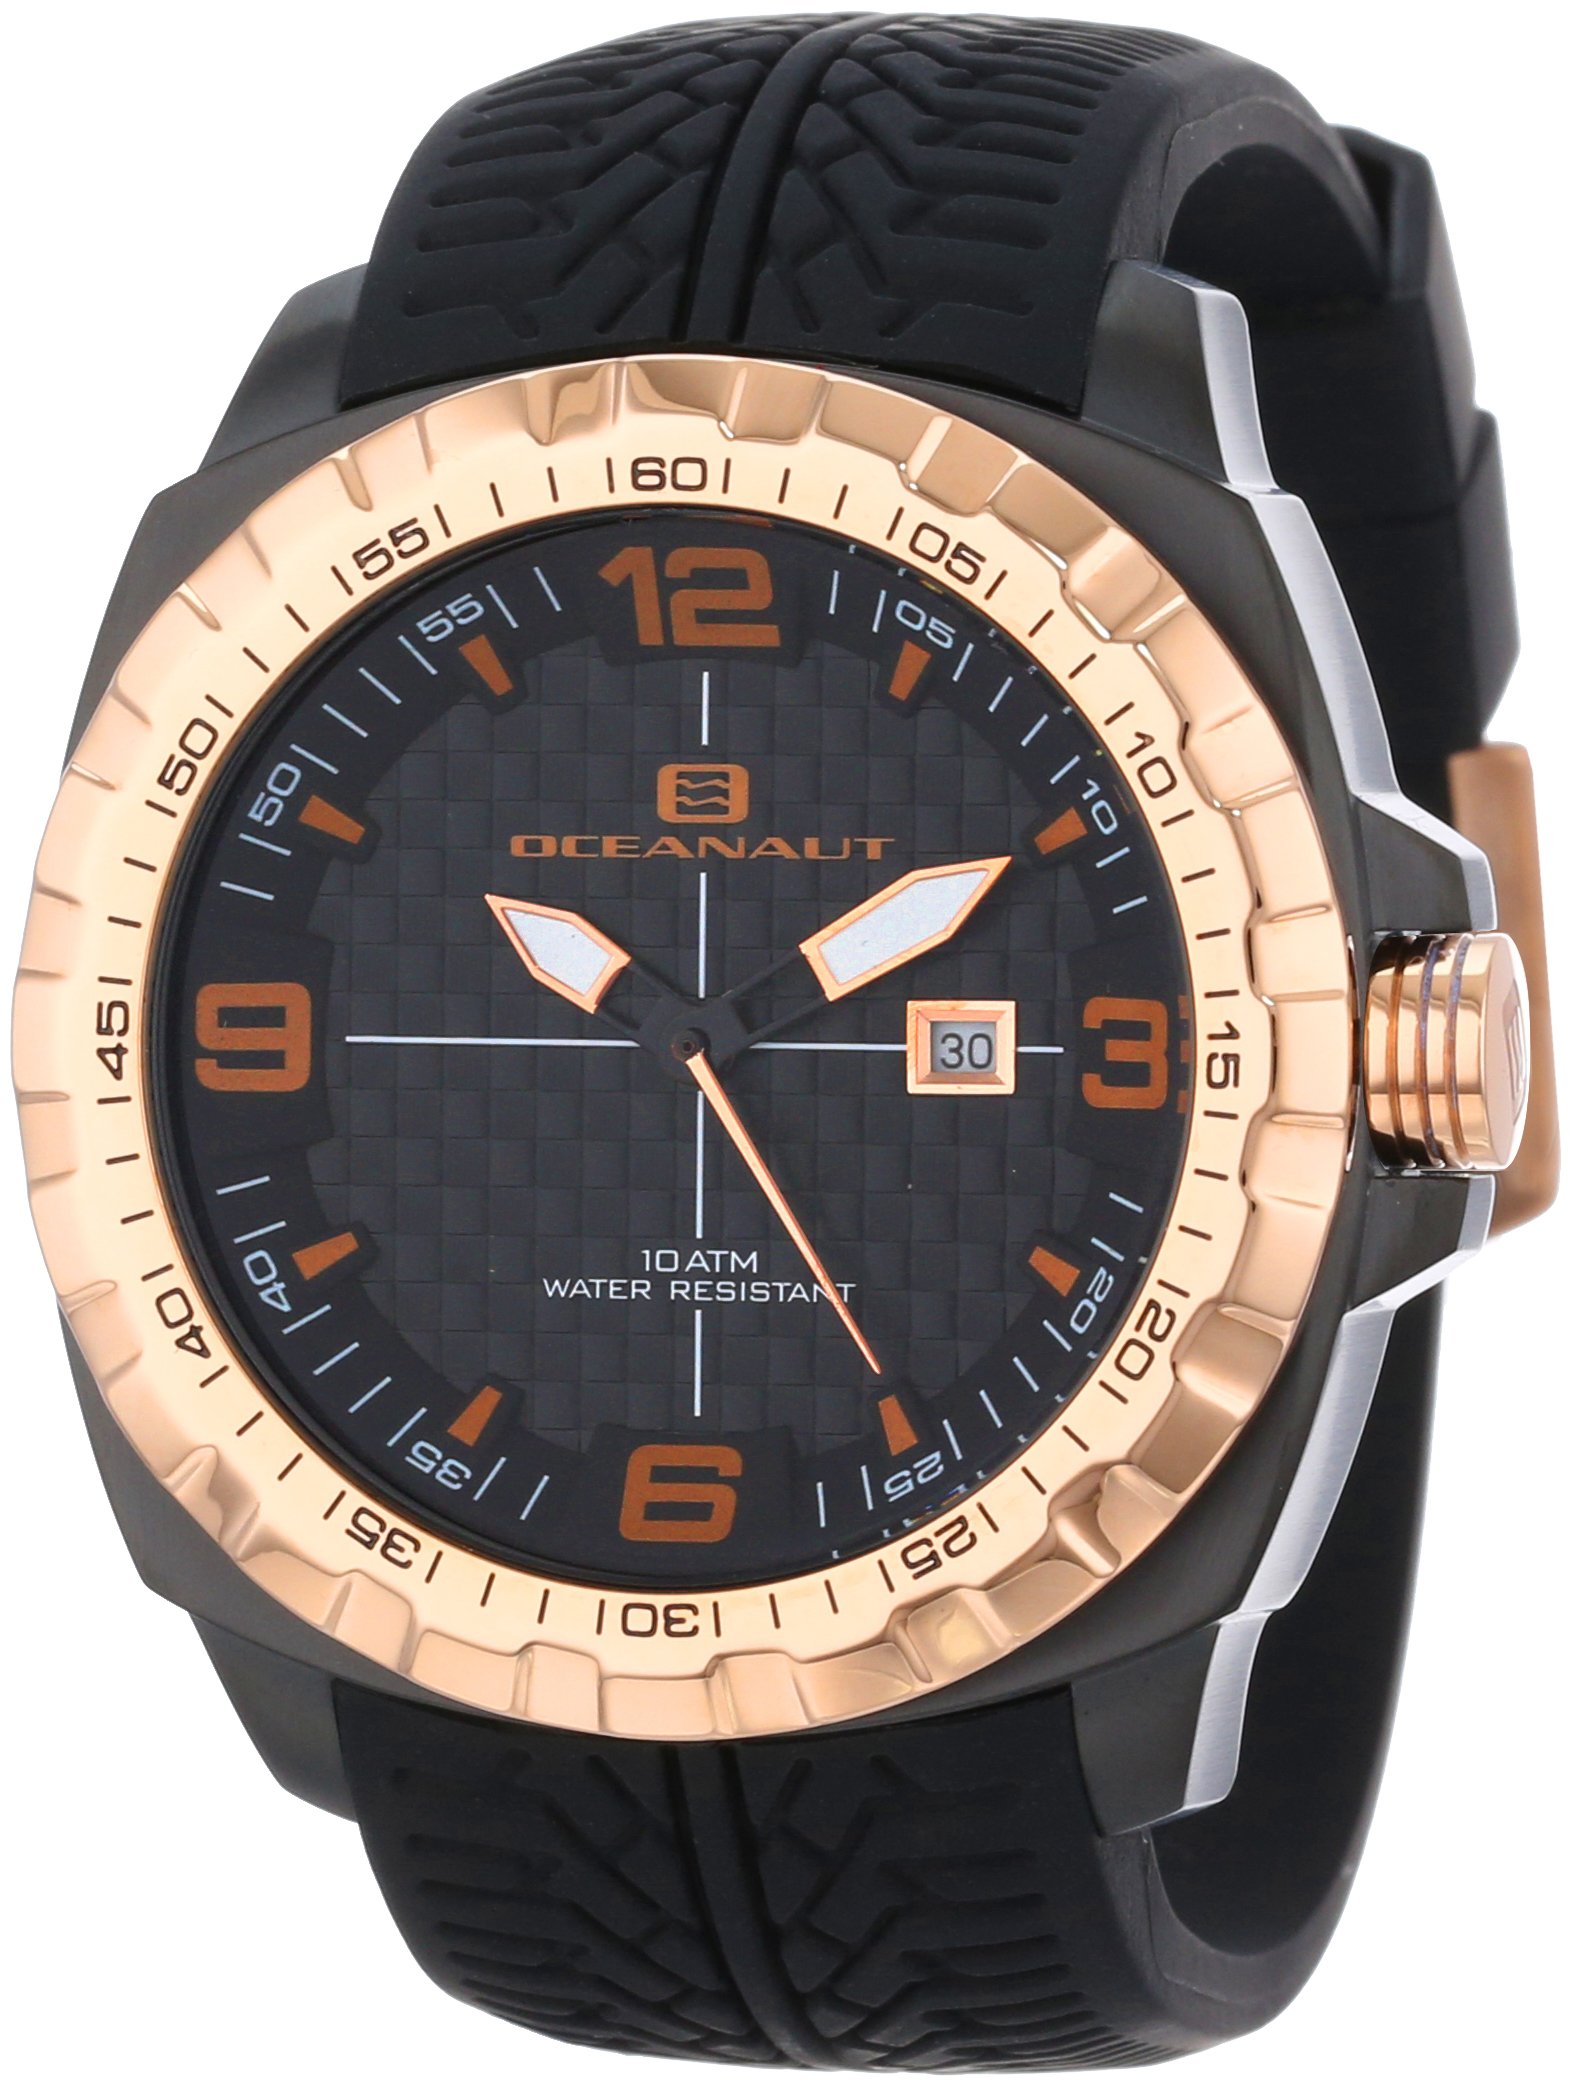 Oceanaut Men's OC1111 Racer Black and Gold-Tone Stainless Steel Watch with Black Silicone Band